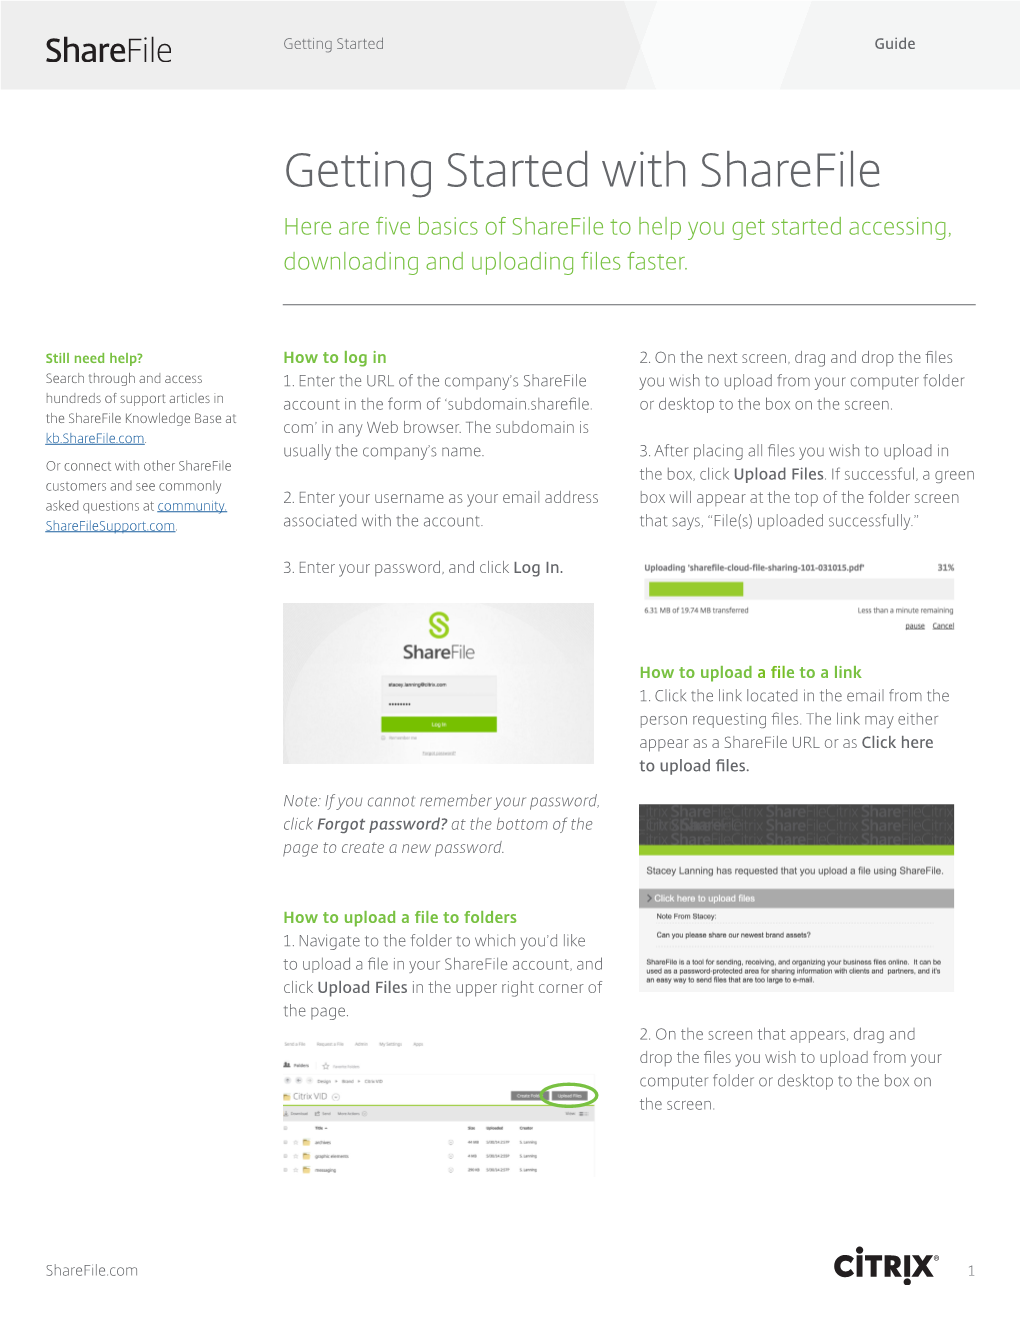 Getting Started with Sharefile: 5 Basics